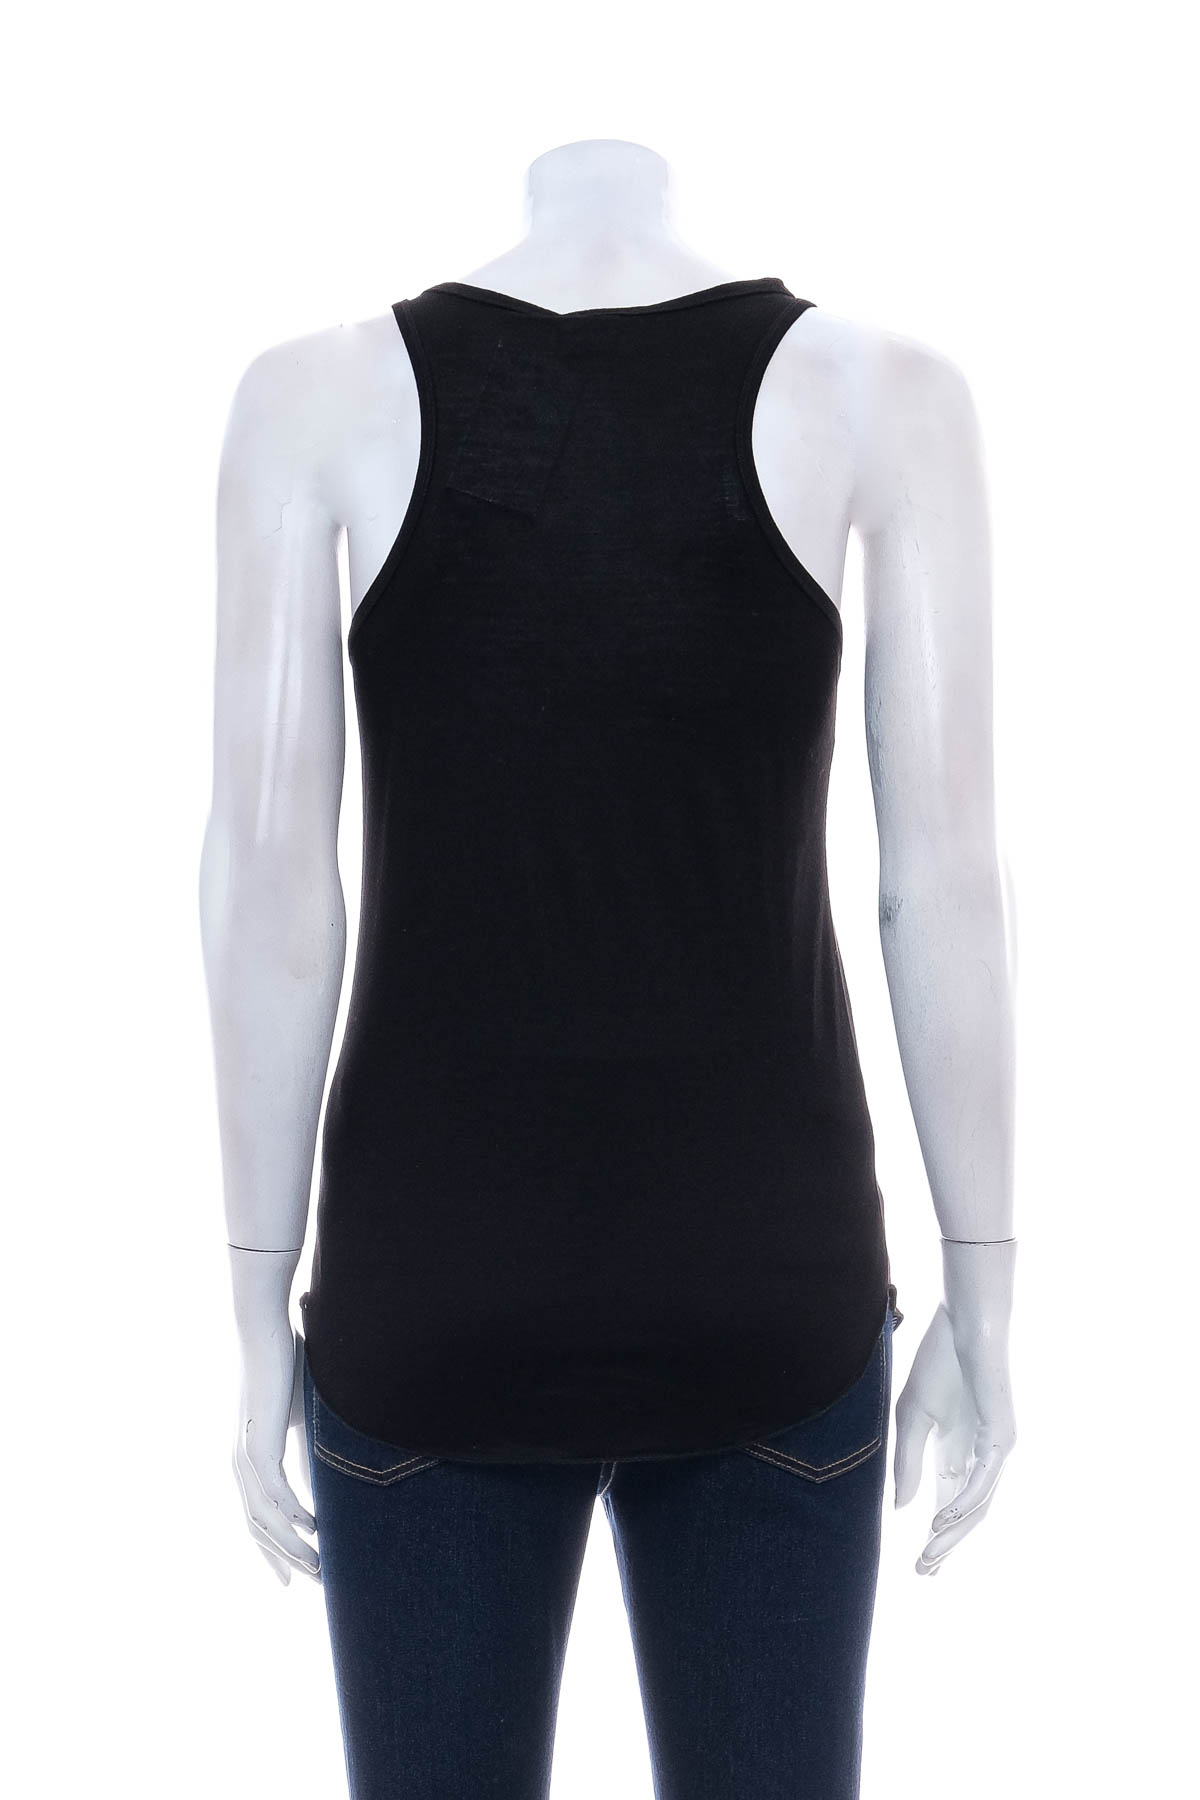 Women's top - Gina Tricot - 1